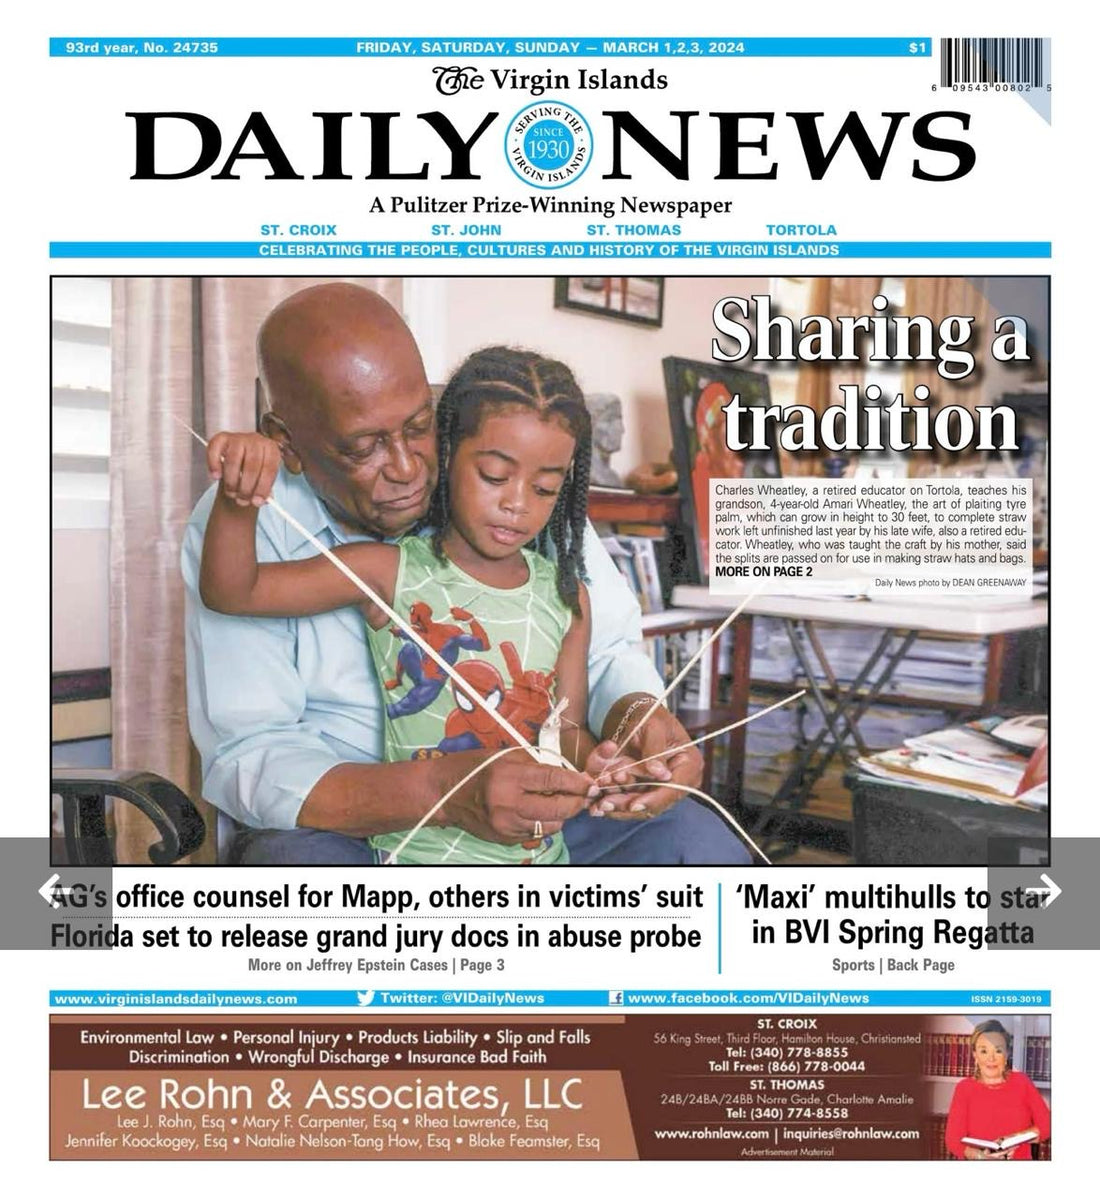 Dr. Charles Wheatley Featured on the Daily News